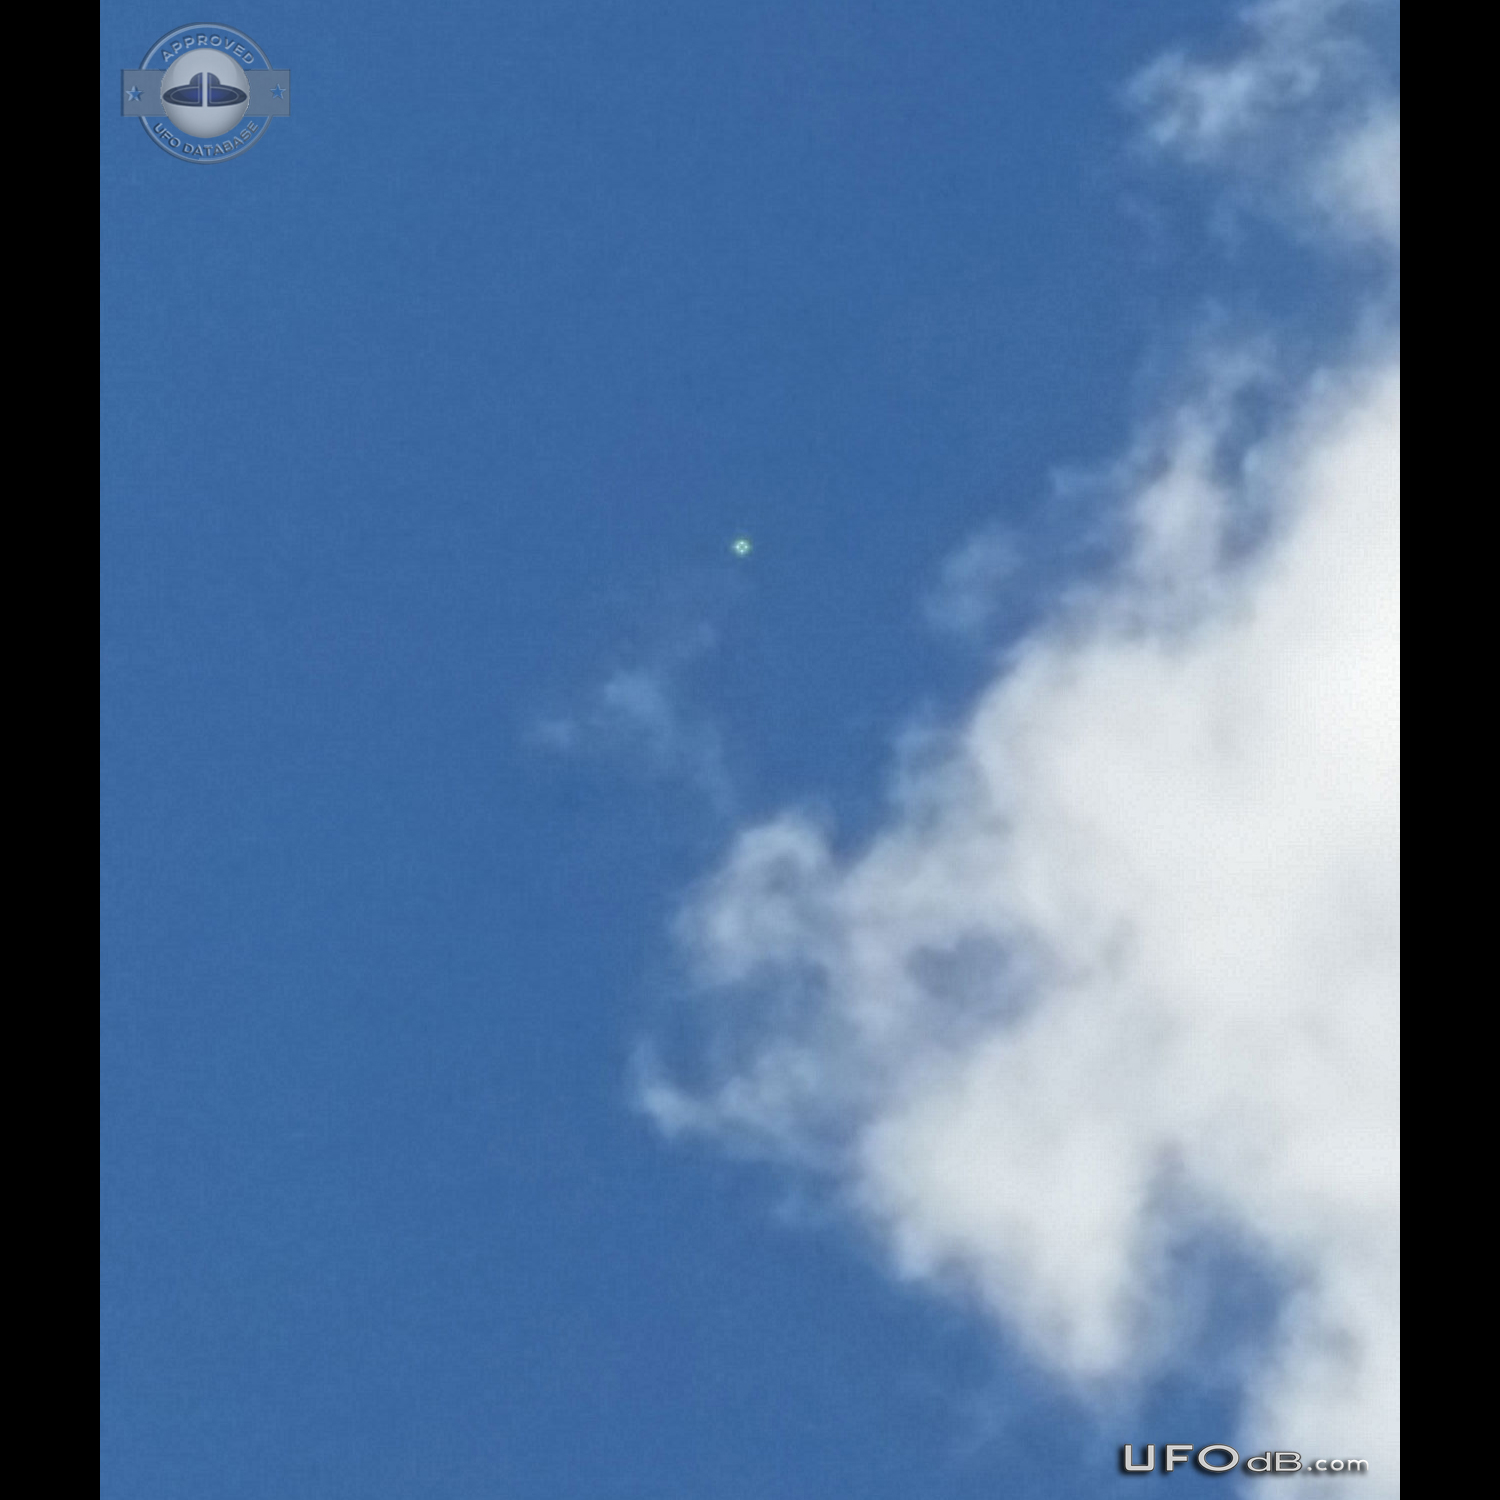 Looked up and saw an bright UFO hovering - Miami Florida USA 2014 UFO Picture #622-1